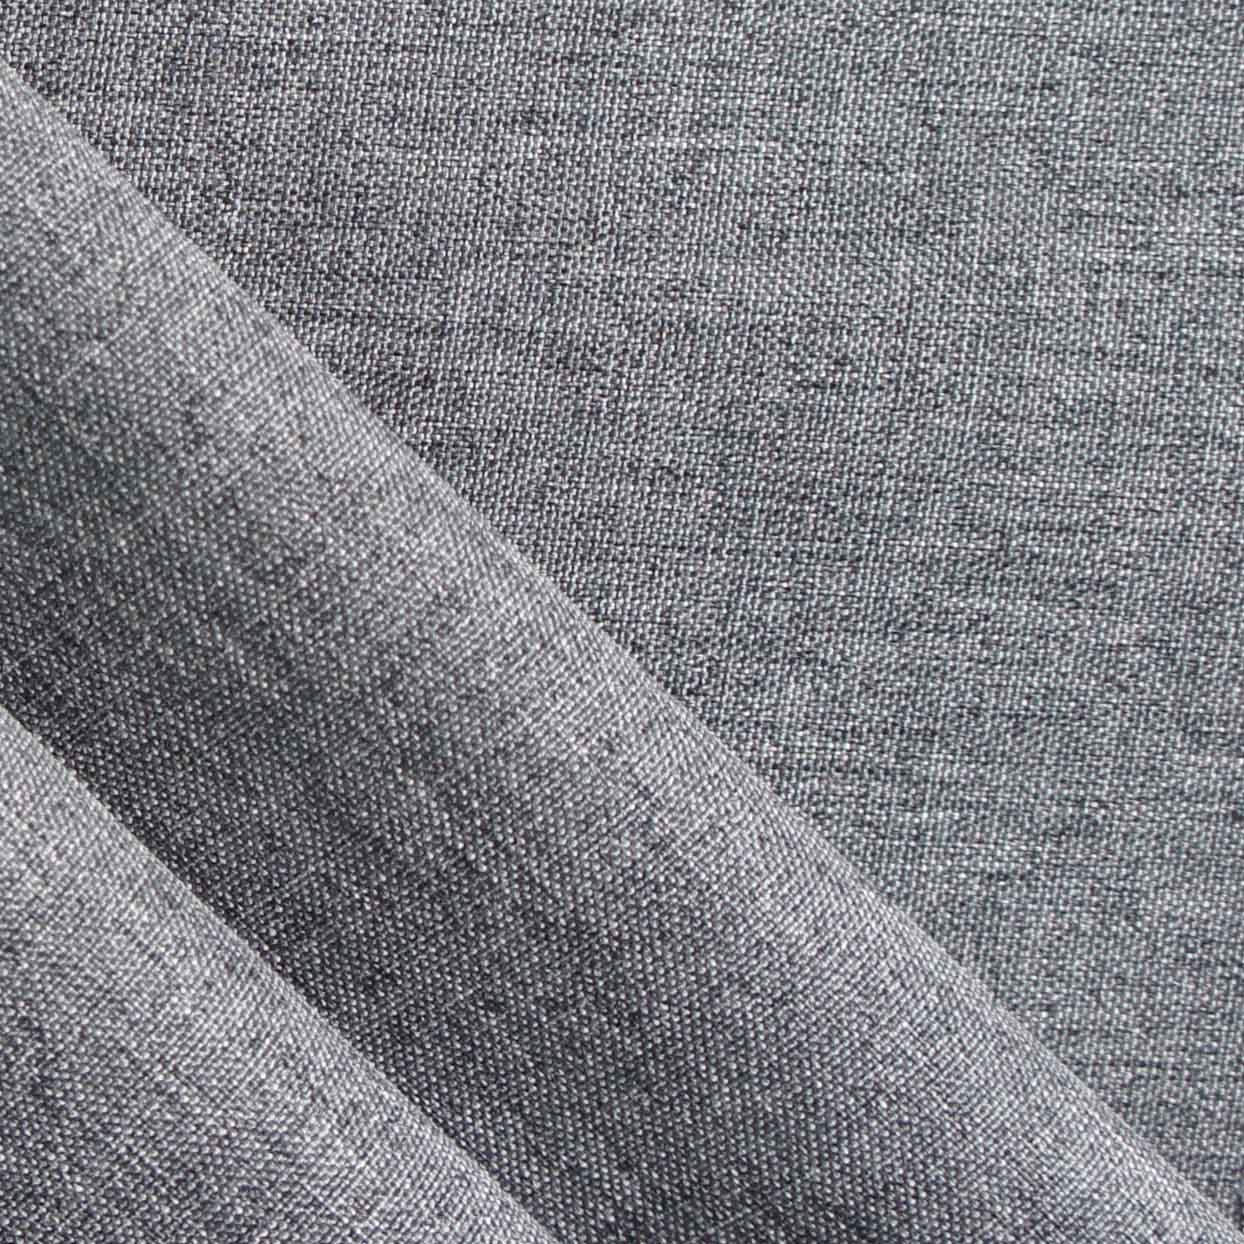 Linen-Like Polyester Oxford Woven Fabric